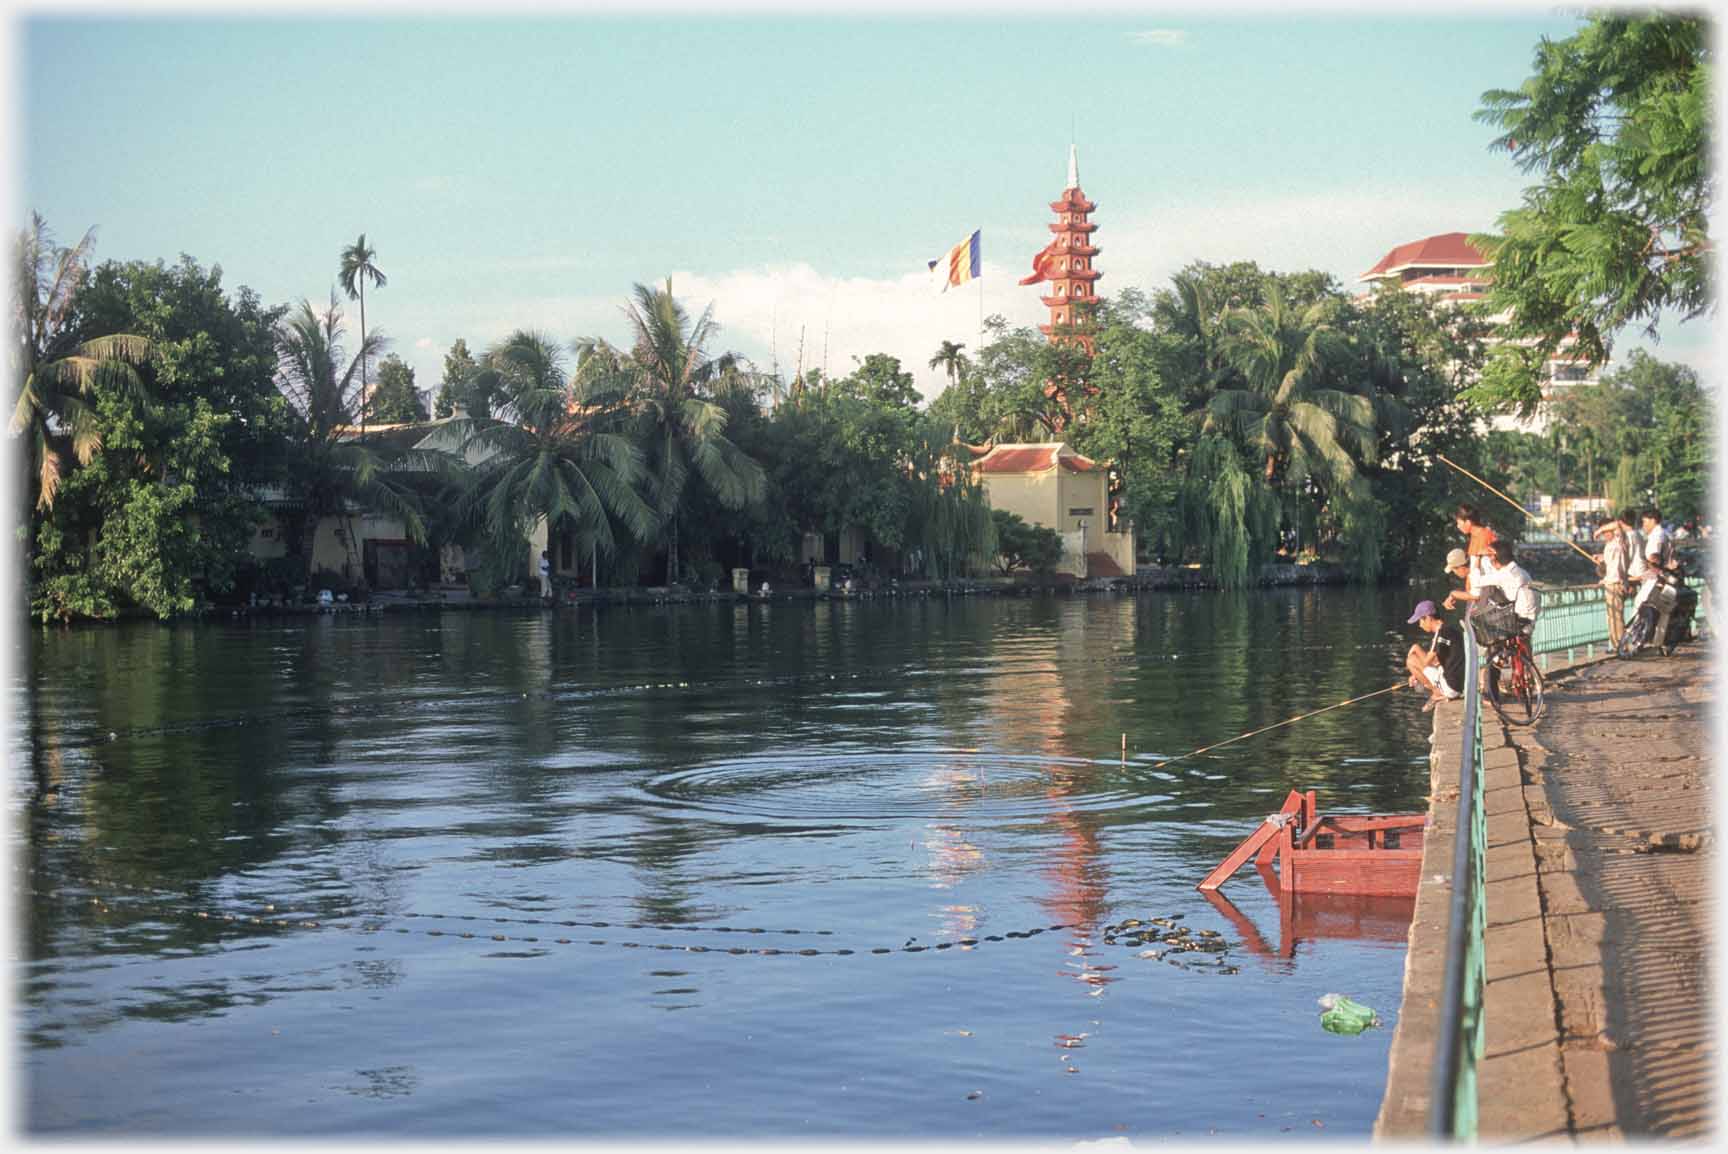 By backwater of lake, thick vegetaion and pagoda above.